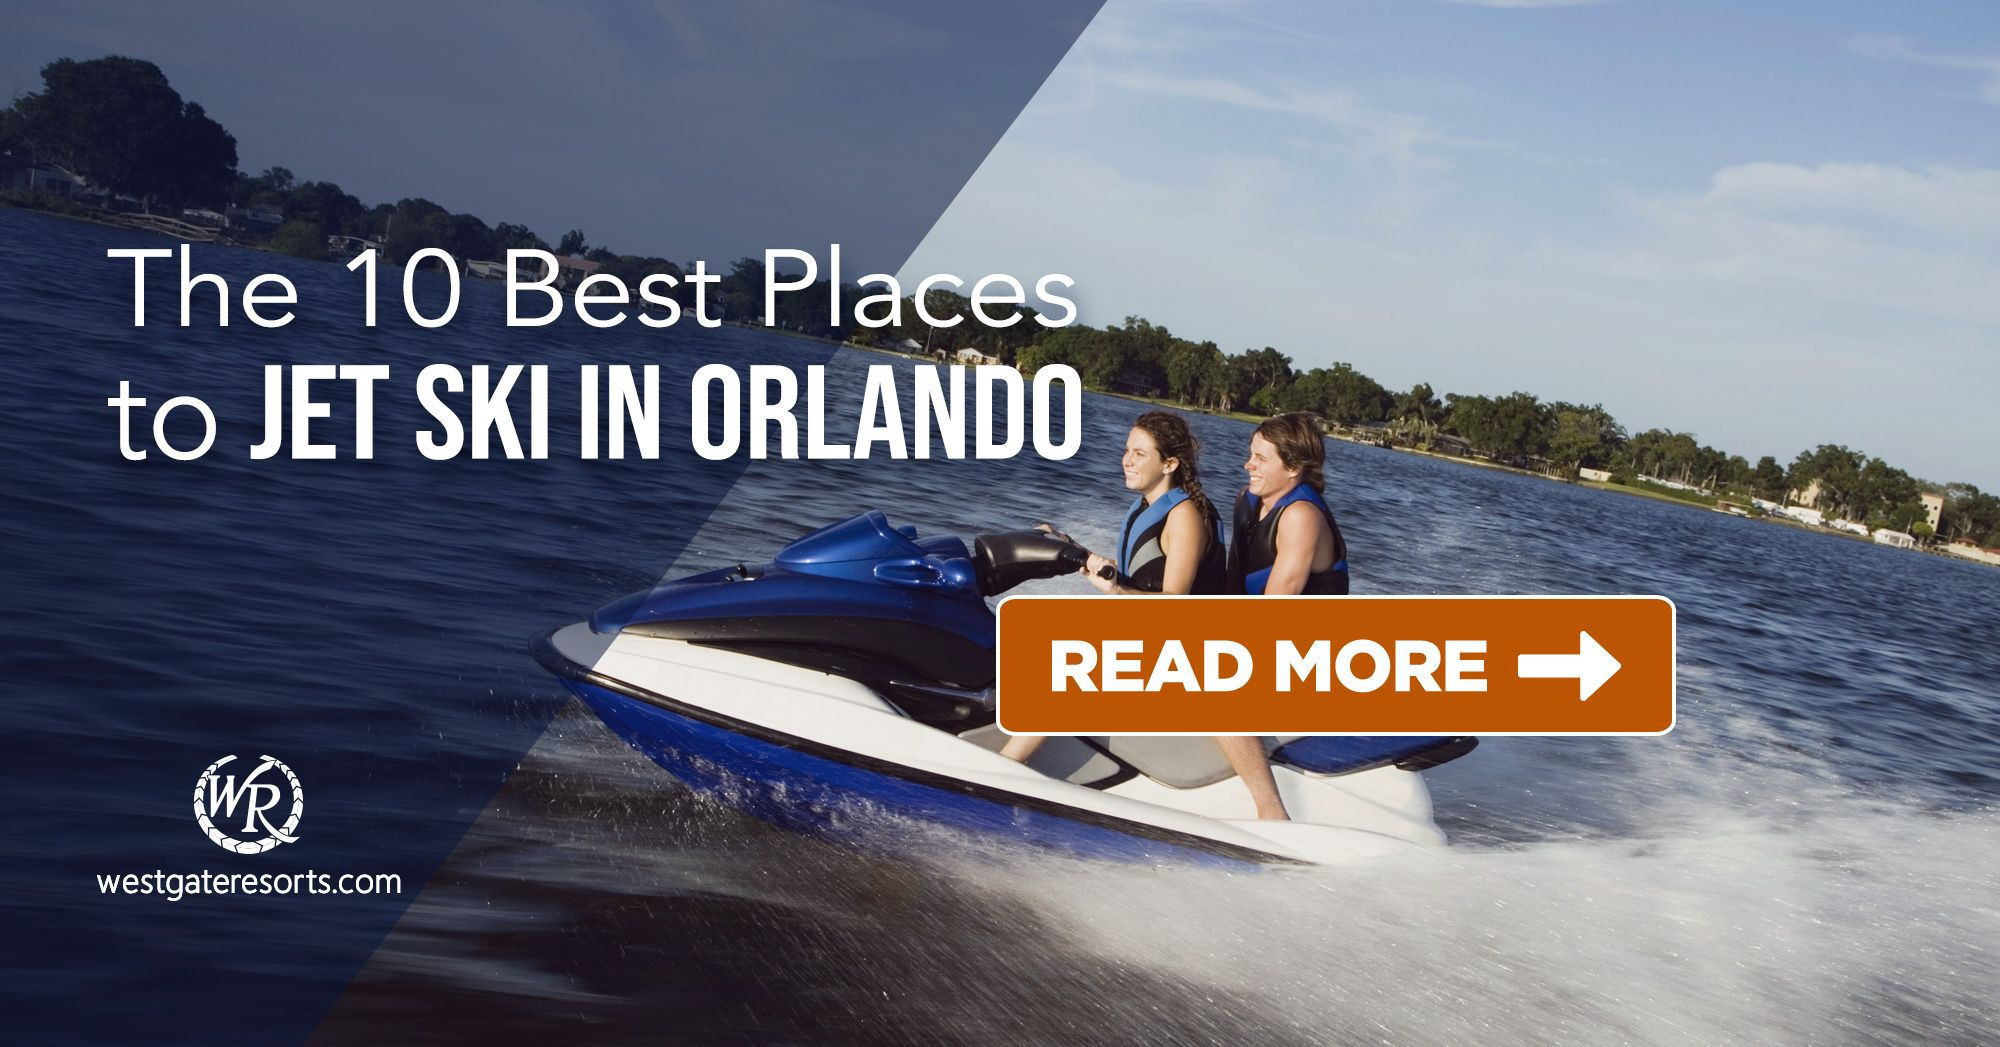 The 10 Best Places to Jet Ski in Orlando